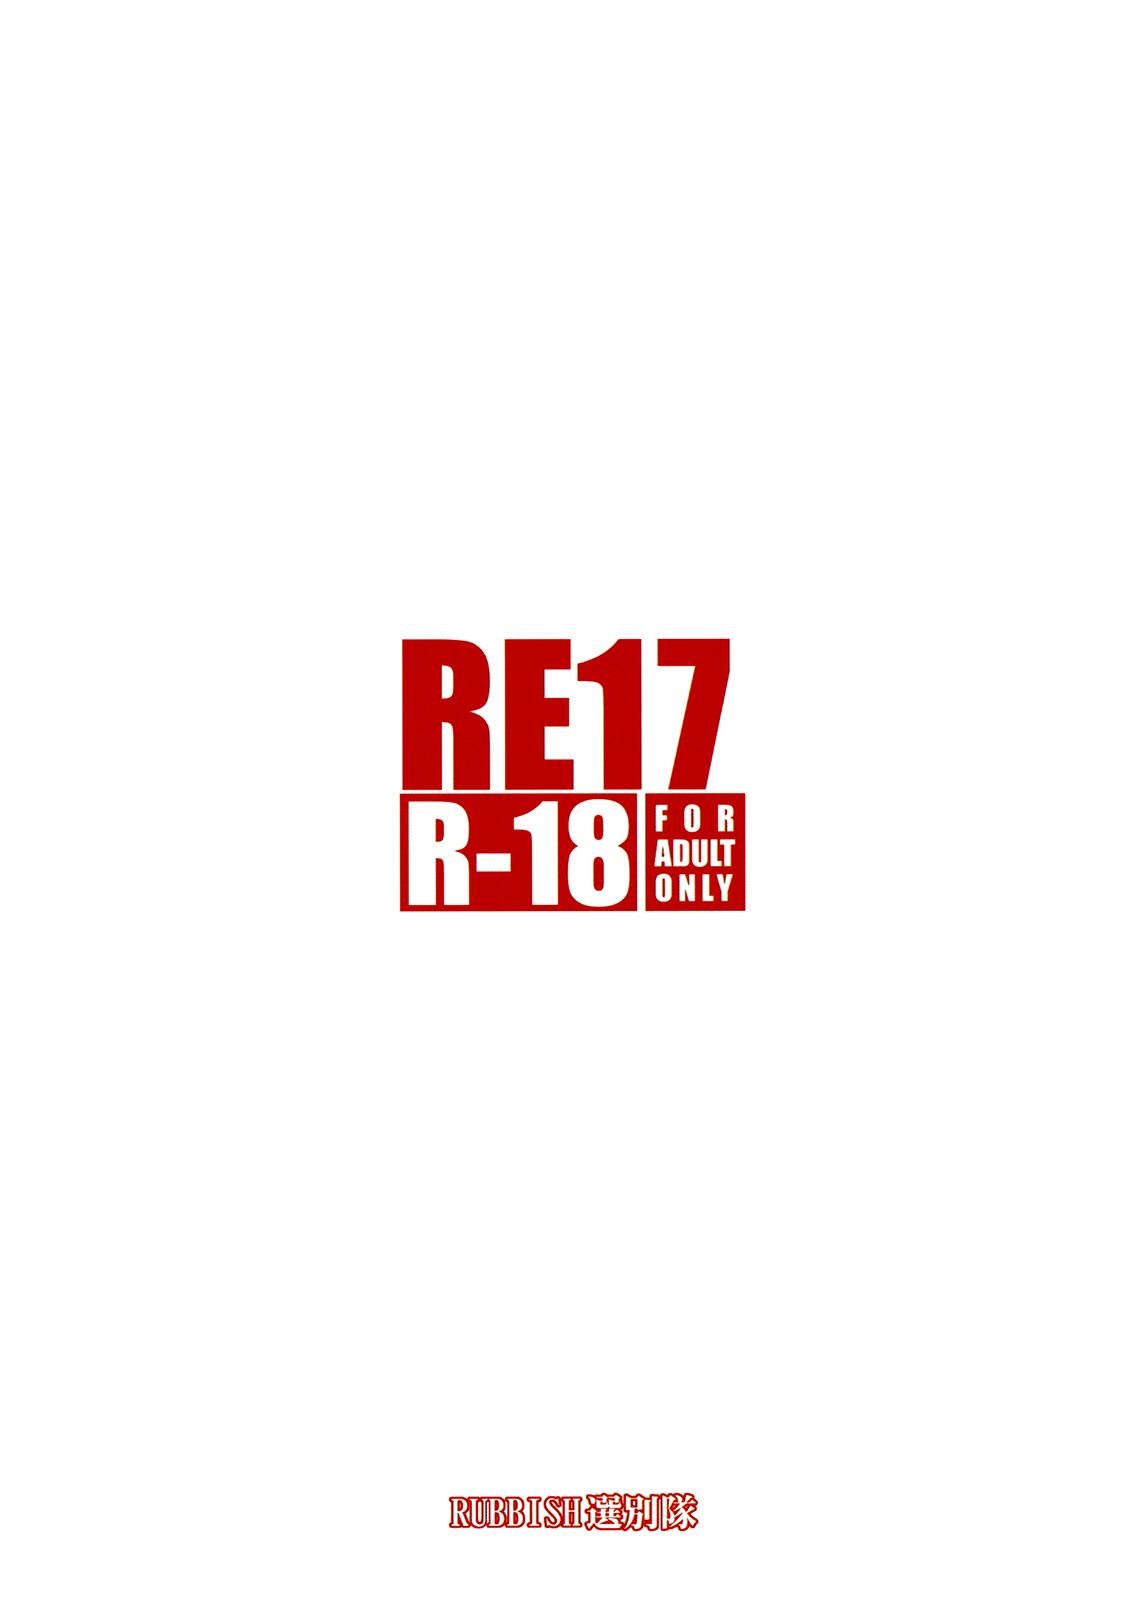 RE 17 32